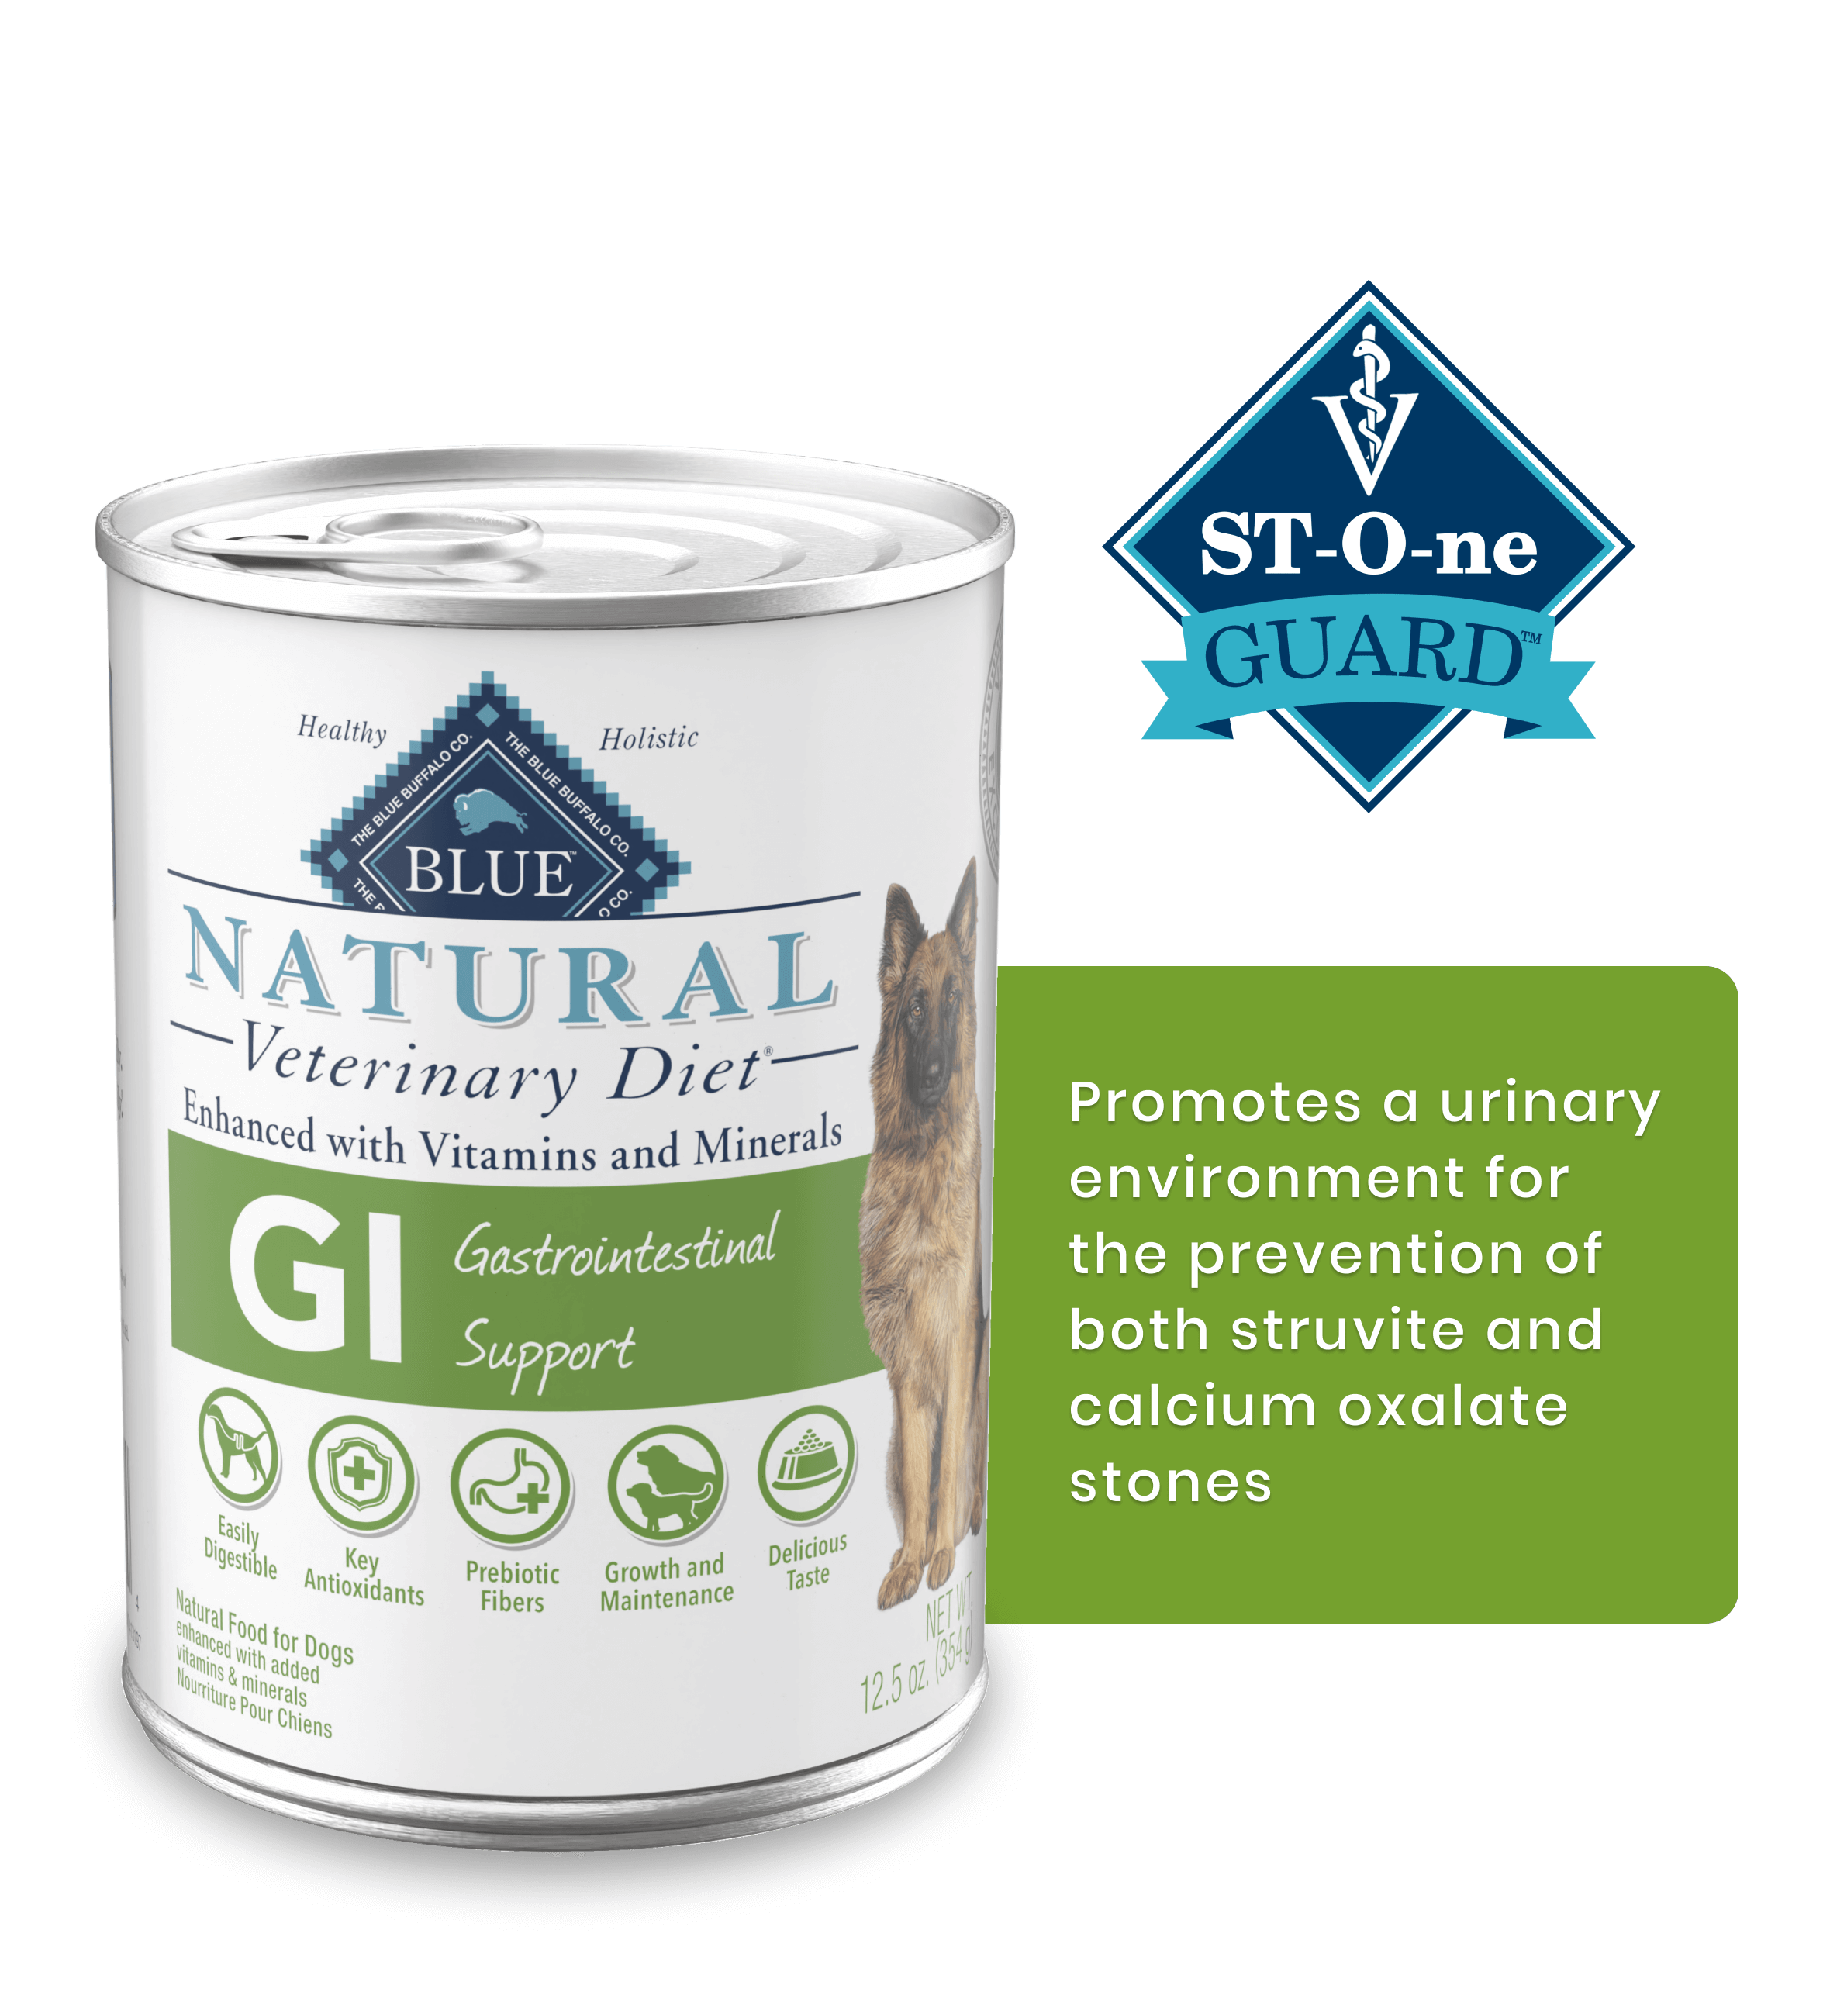 GI Gastrointestinal Support St-O-ne Guard Promotes a urinary environment for the prevention of both struvite and calcium oxalate stones